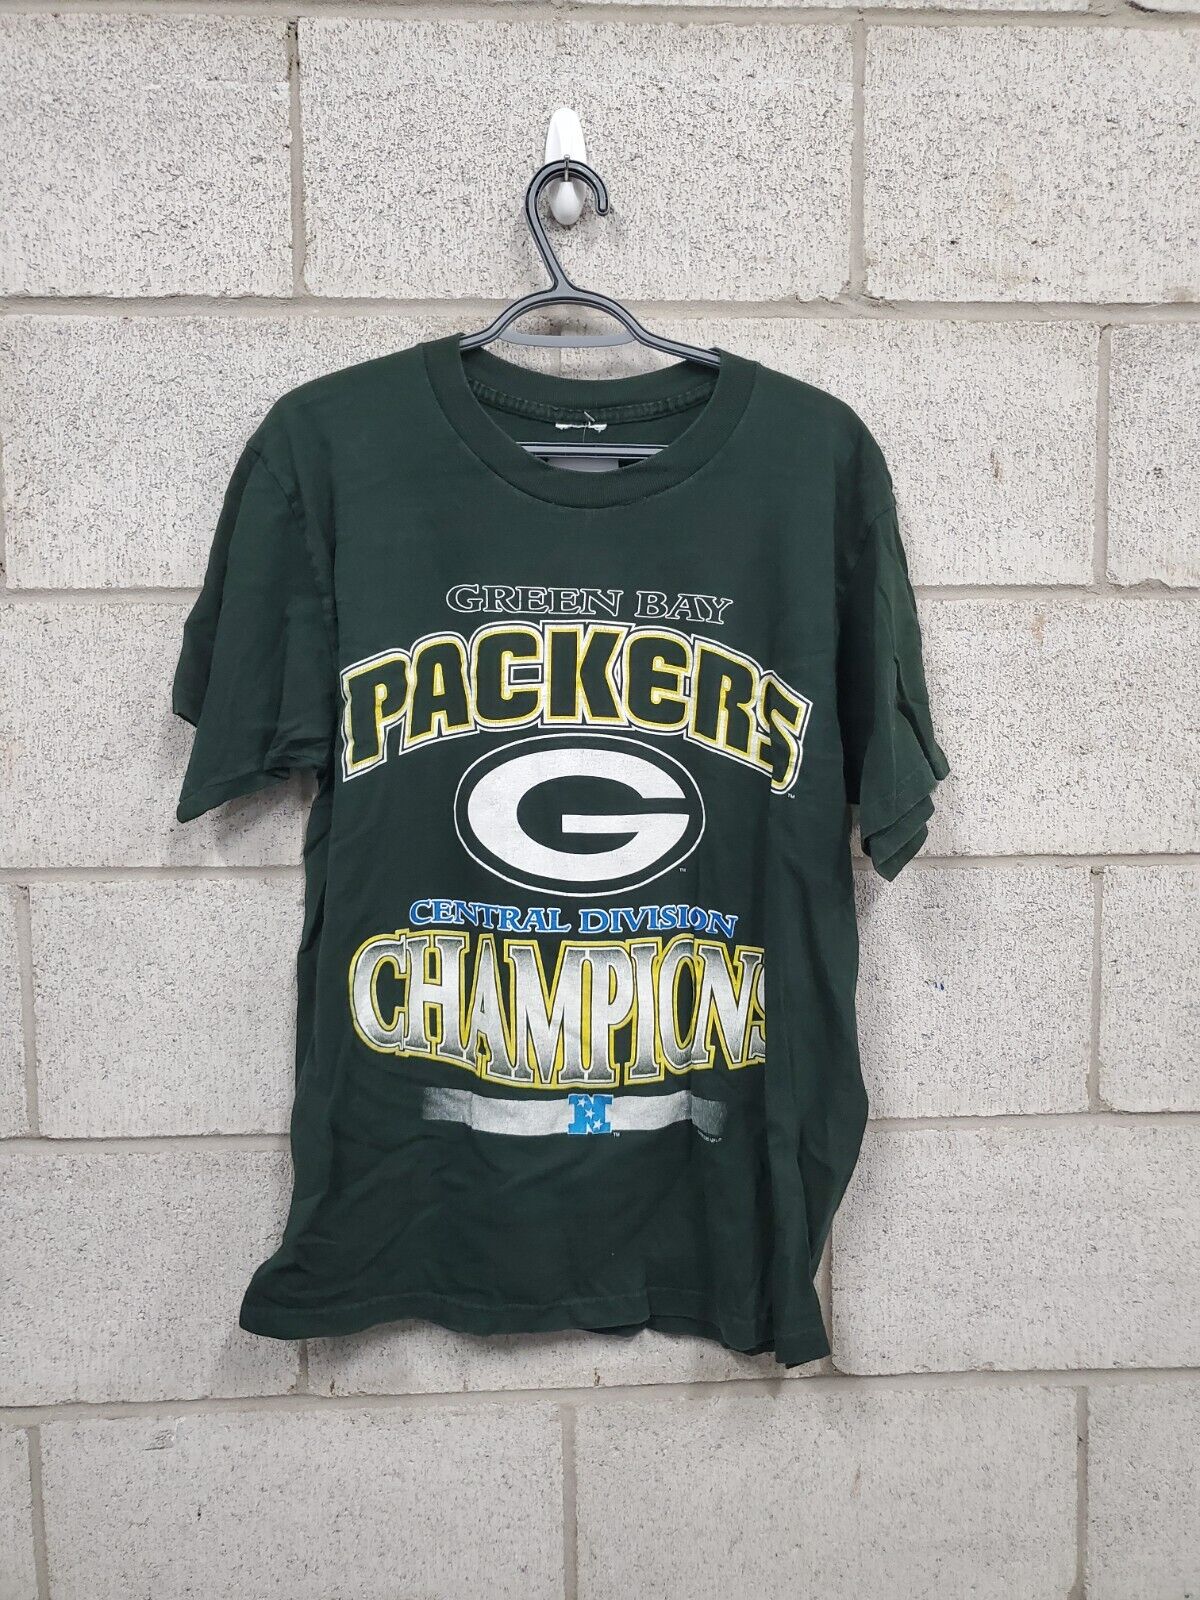 Mens Green Bay Packers T-Shirt Fits Small